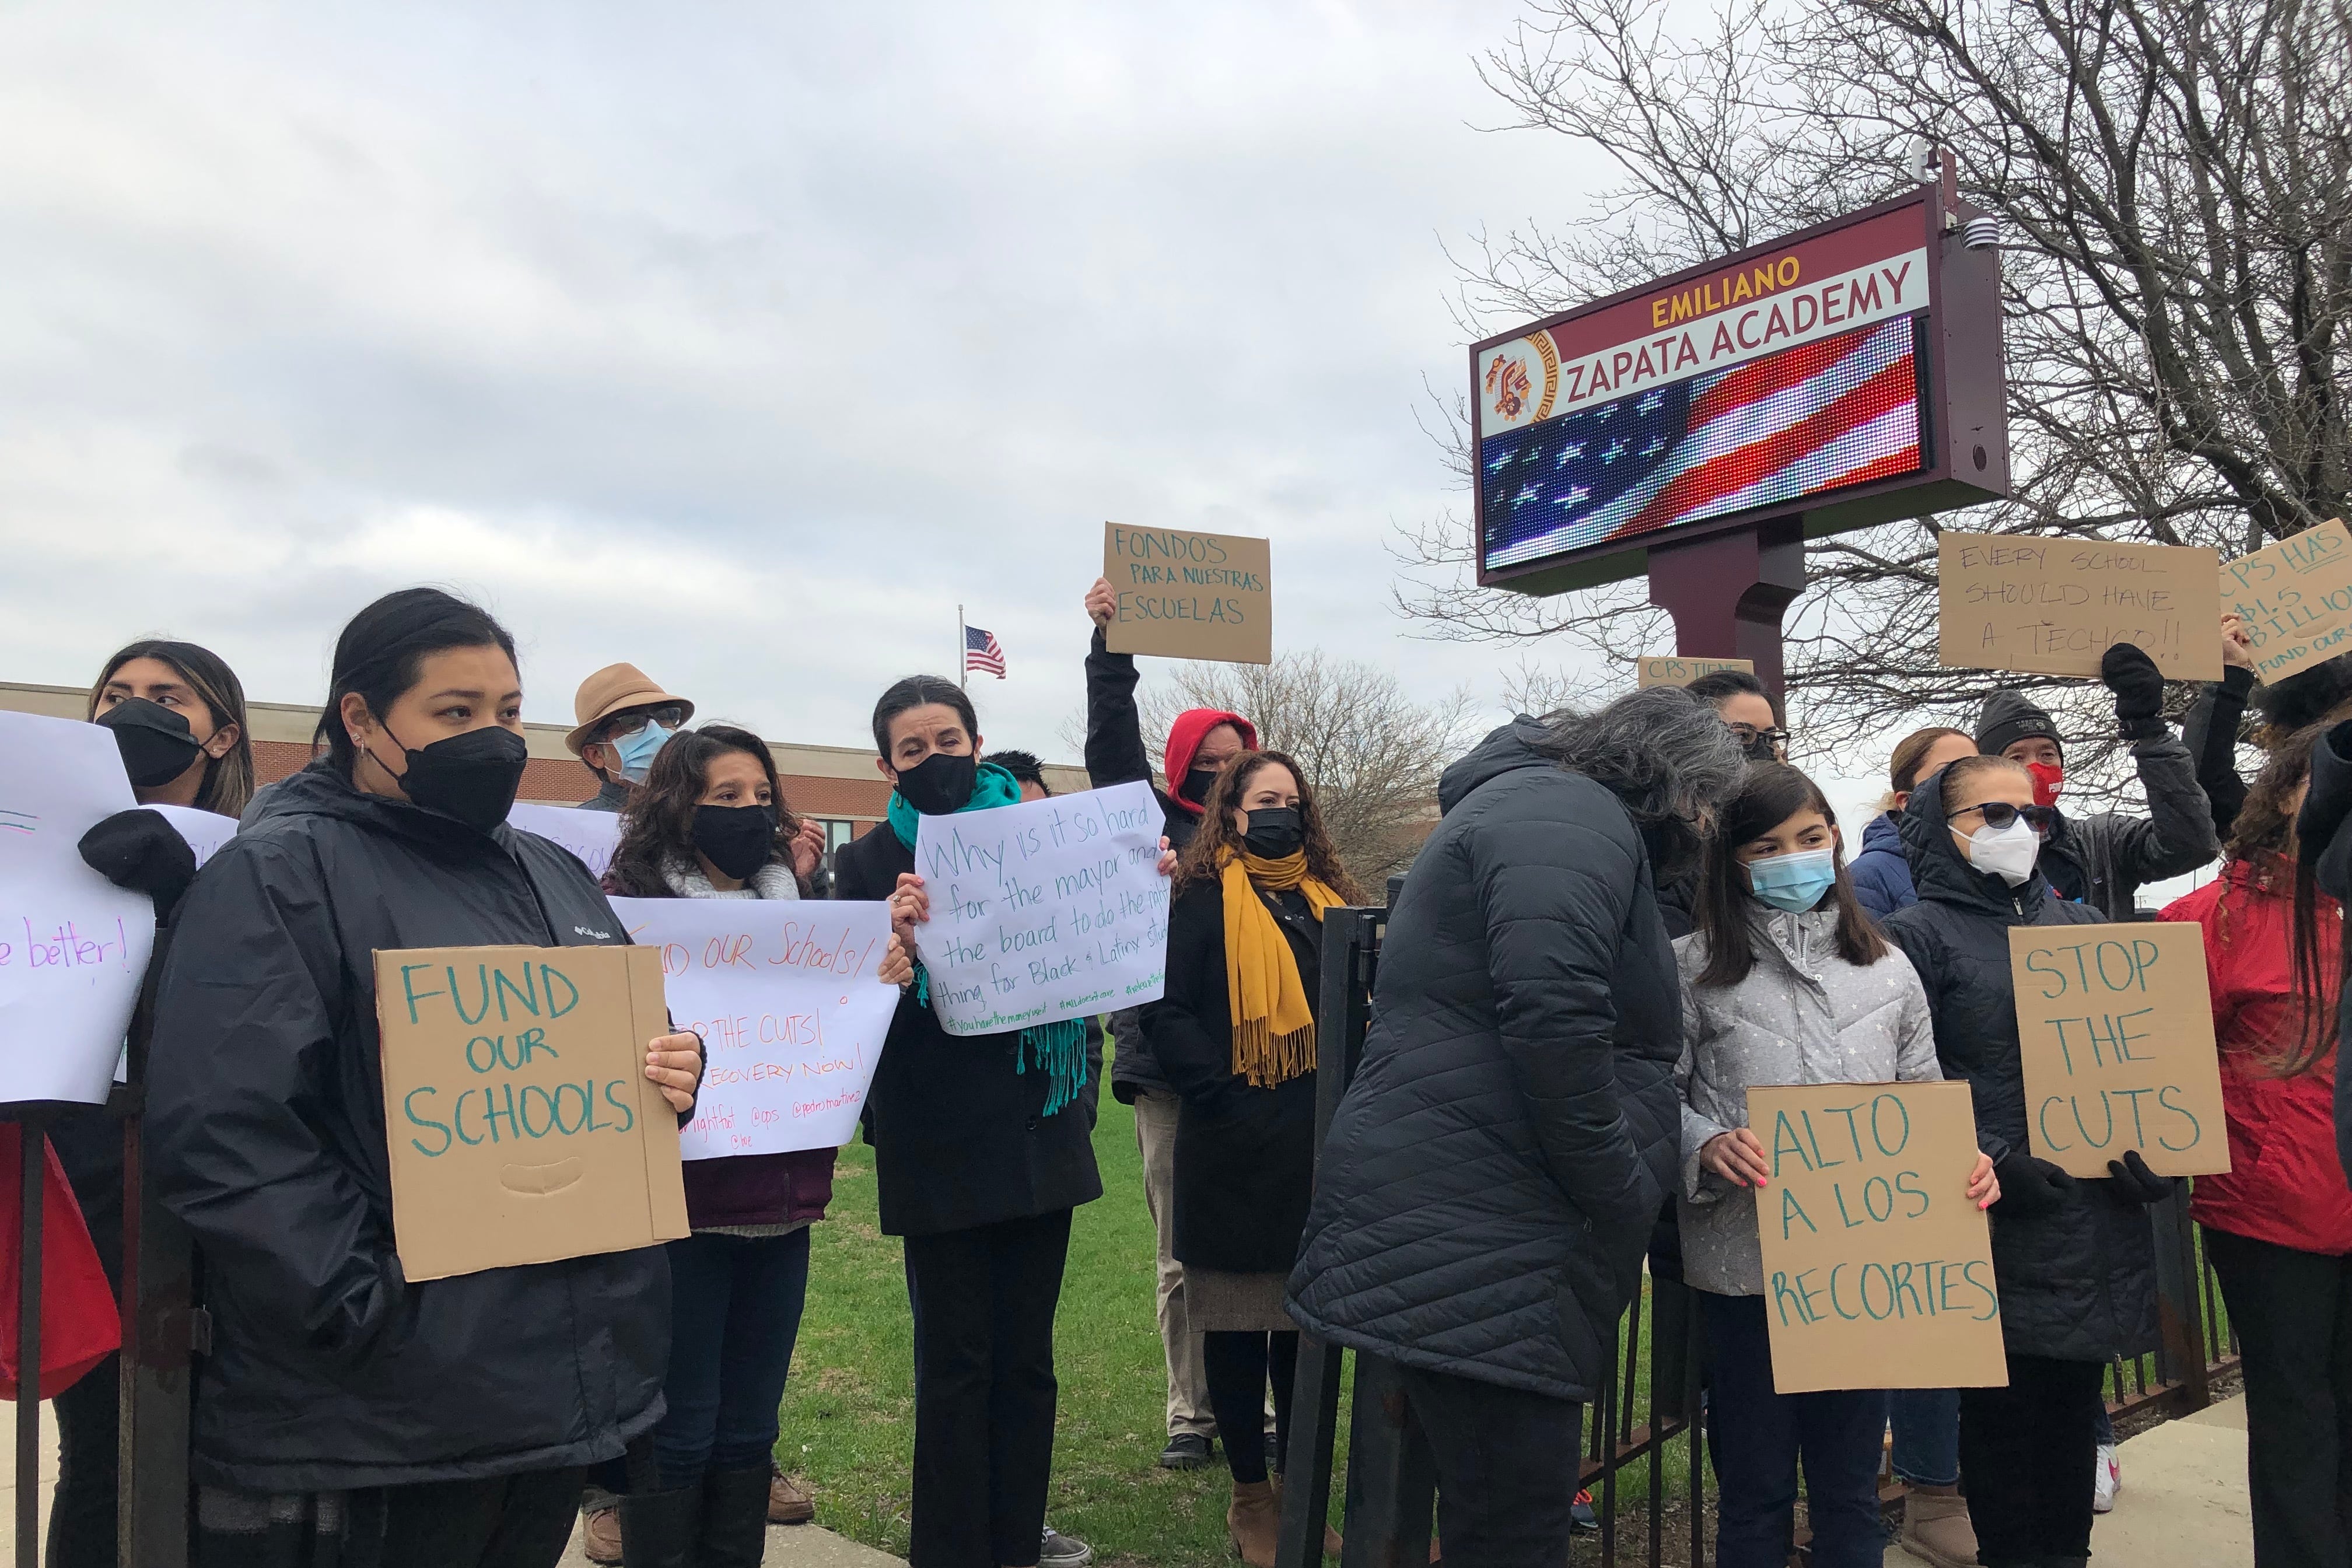 Nearly 50 Chicago Teachers Union members, parents, elected officials, and community groups decry budget cuts at Zapata Academy.